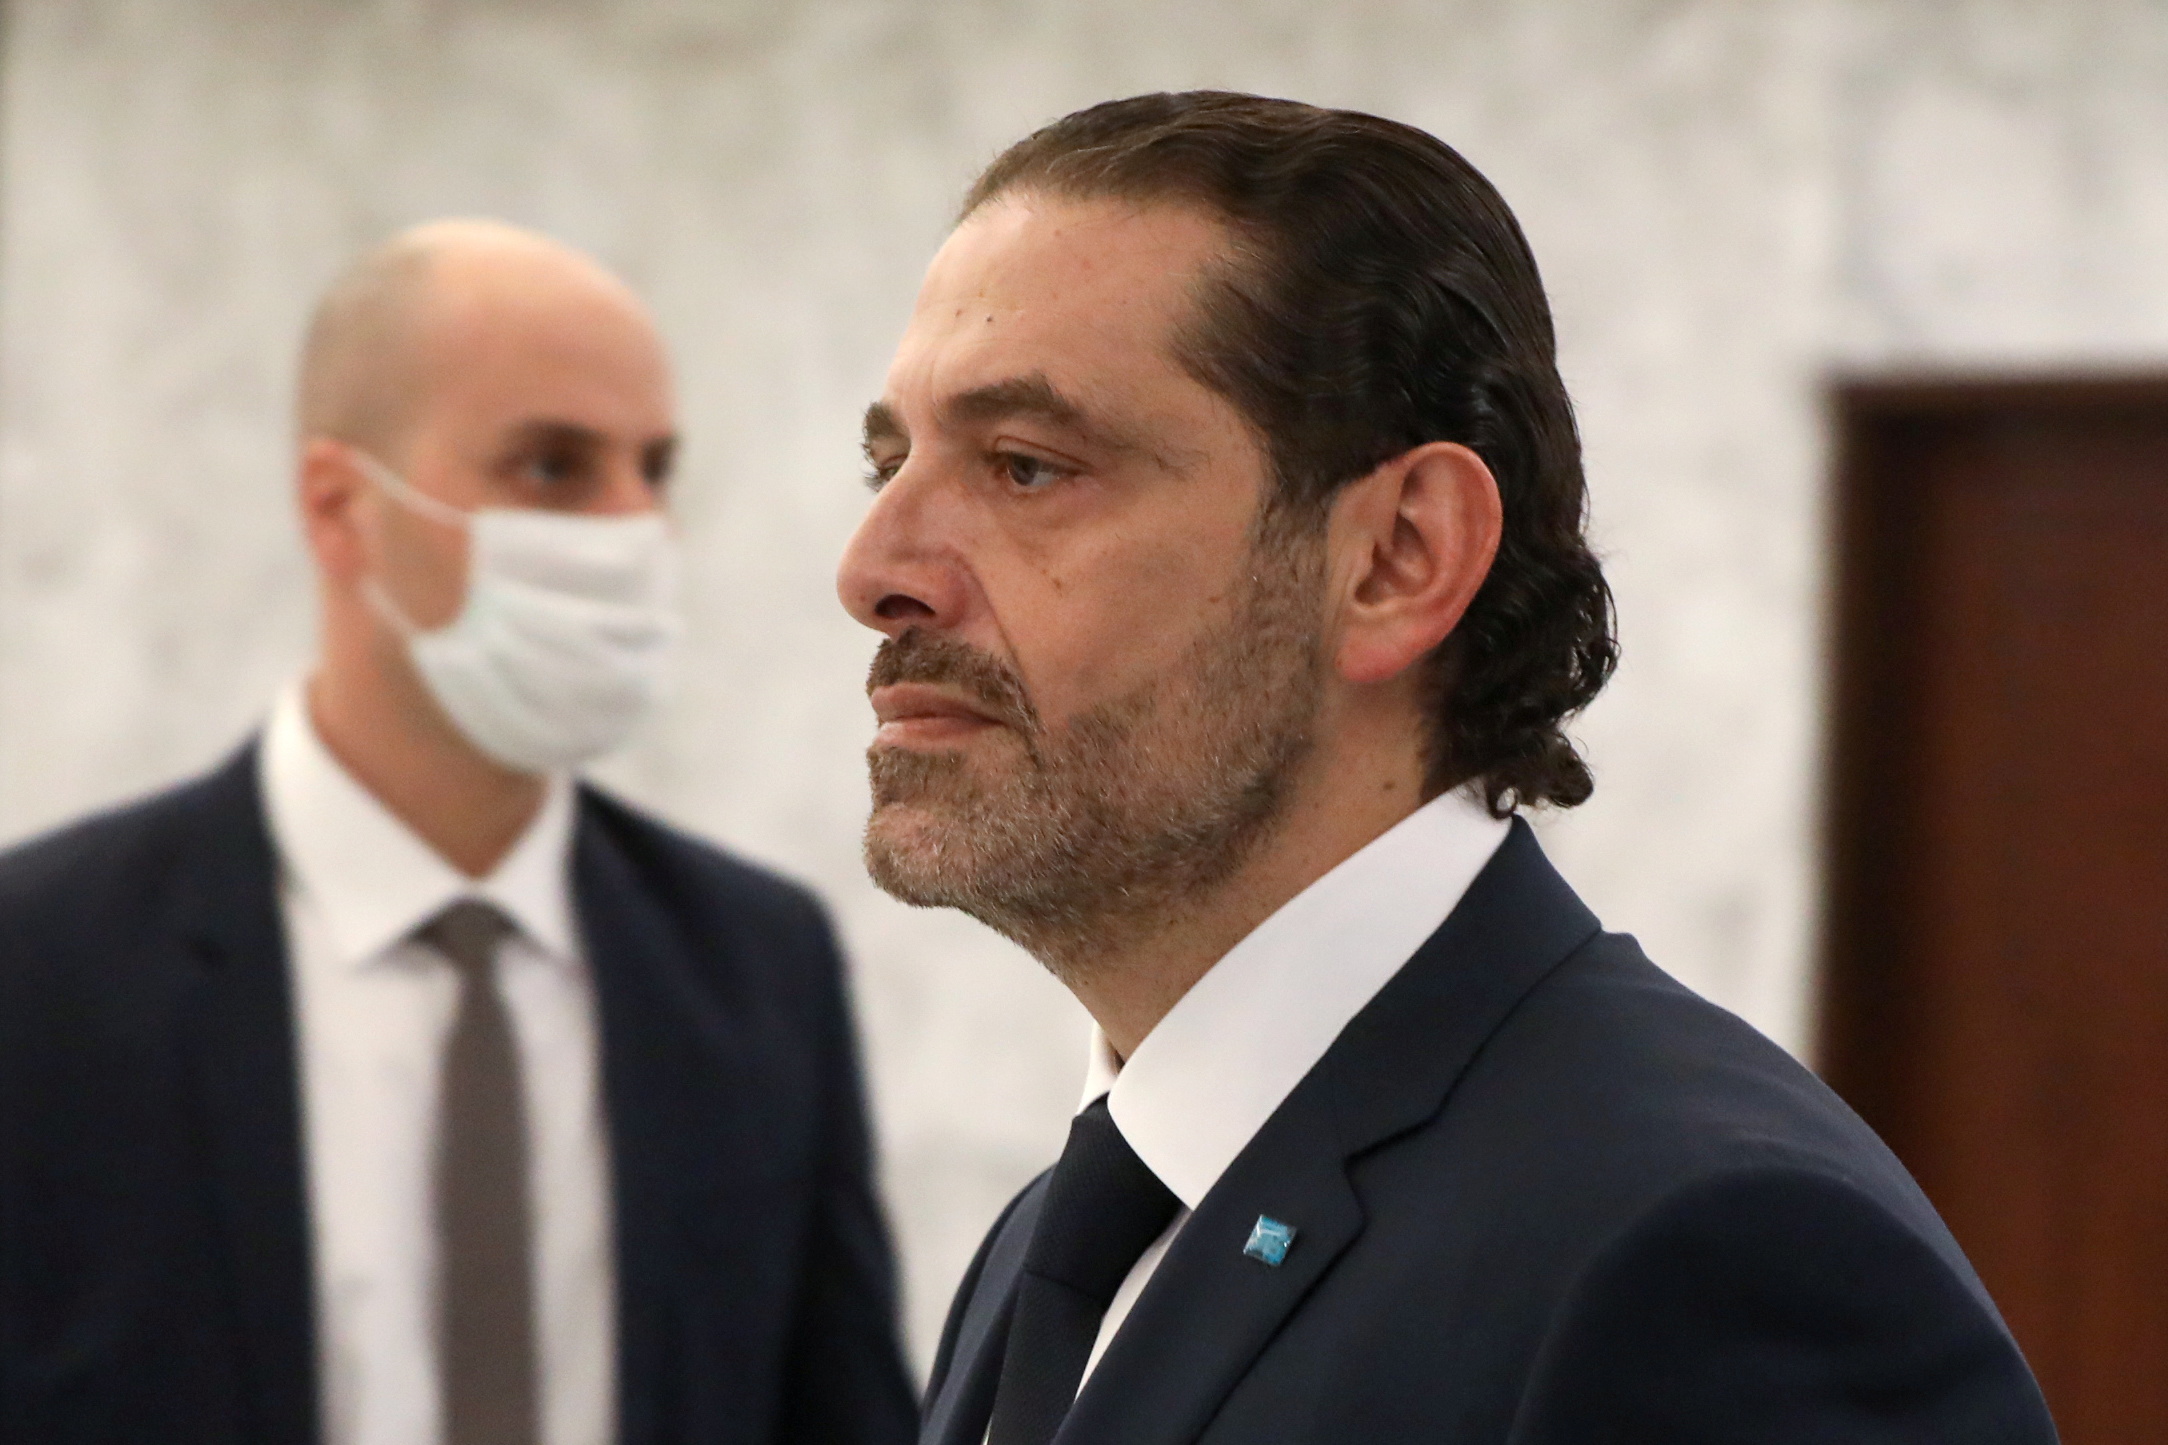 Prime Minister-designate Saad al-Hariri walks after meeting with Lebanon's President Michel Aoun at the presidential palace in Baabda, Lebanon March 22, 2021. REUTERS/Mohamed Azakir